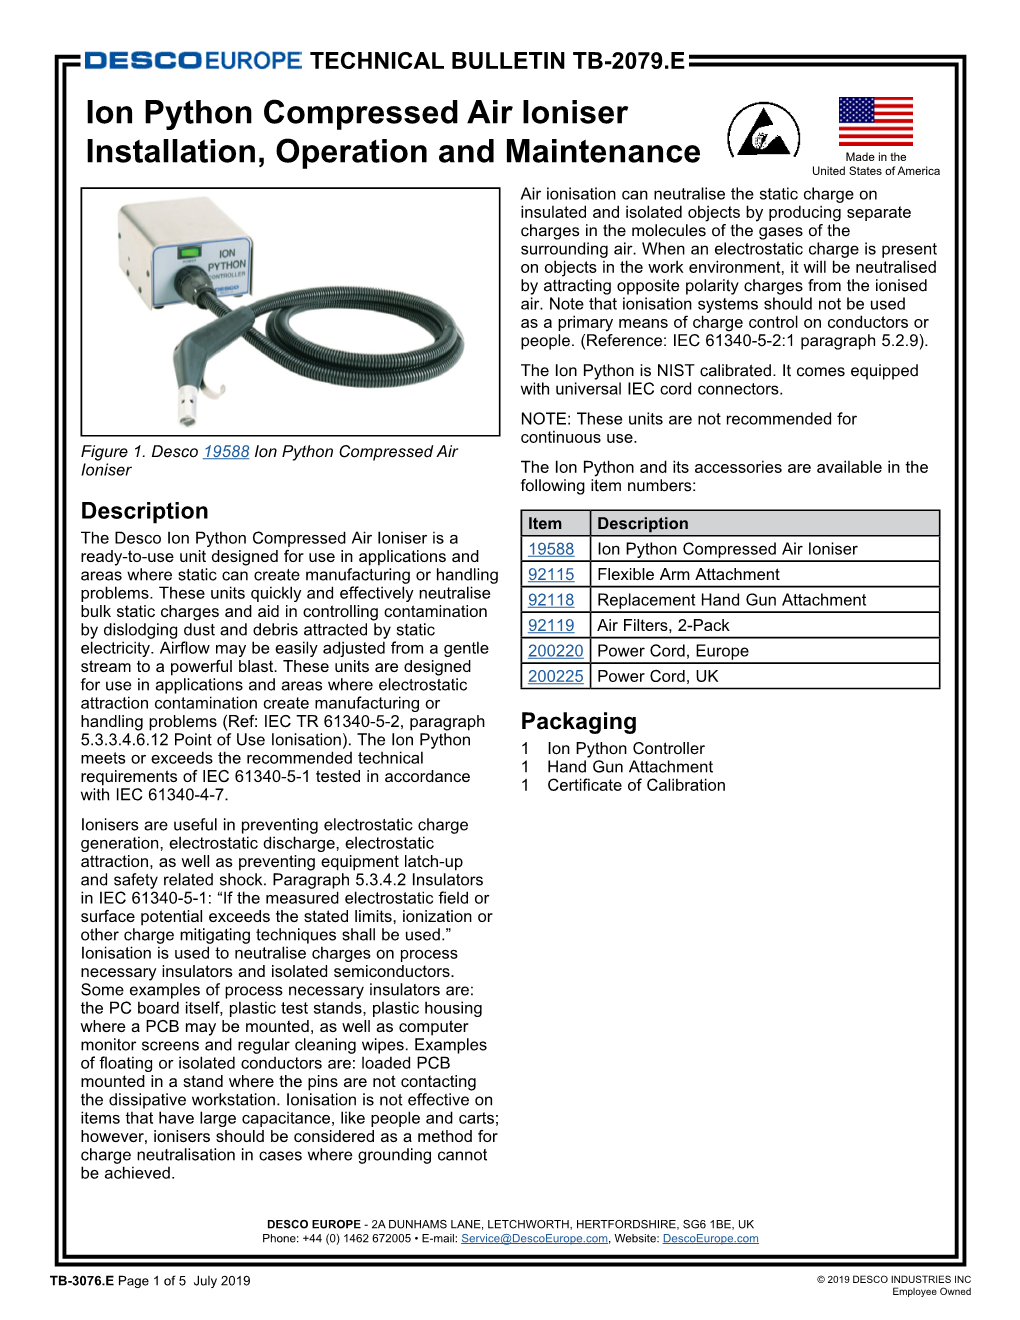 Ion Python Compressed Air Ioniser Installation, Operation And